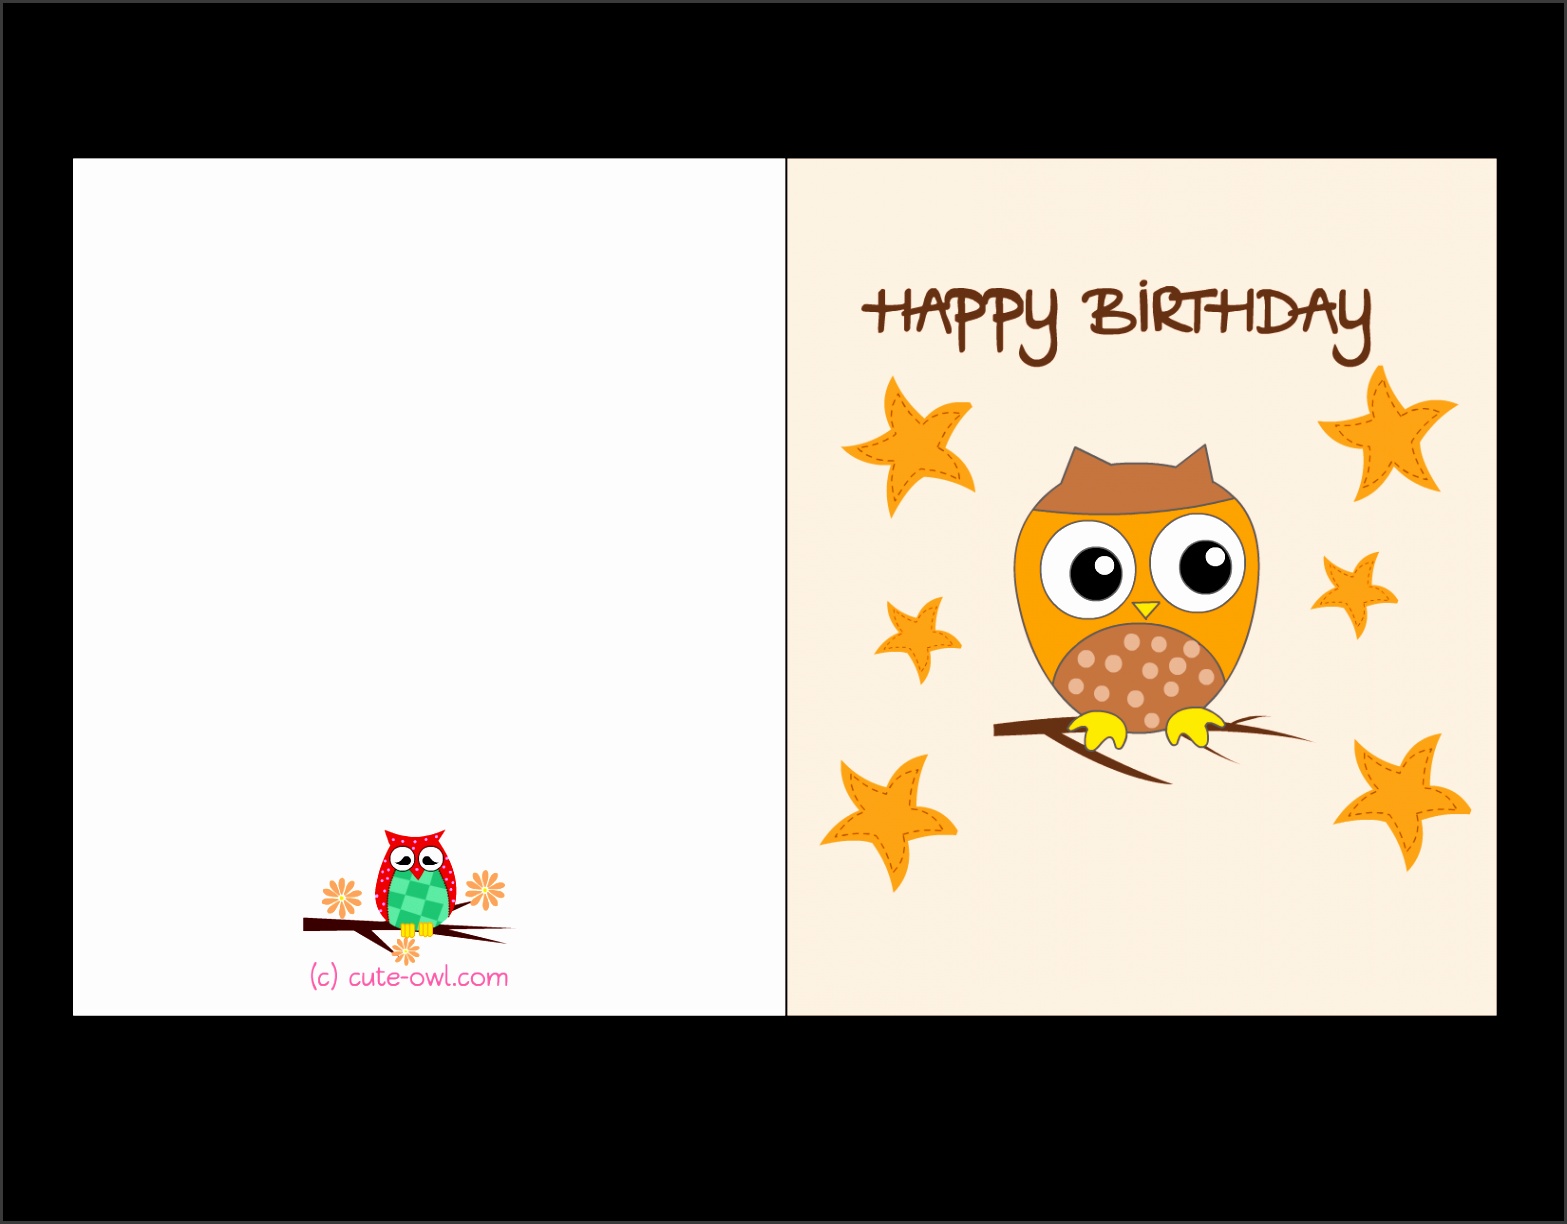 greeting card template free download